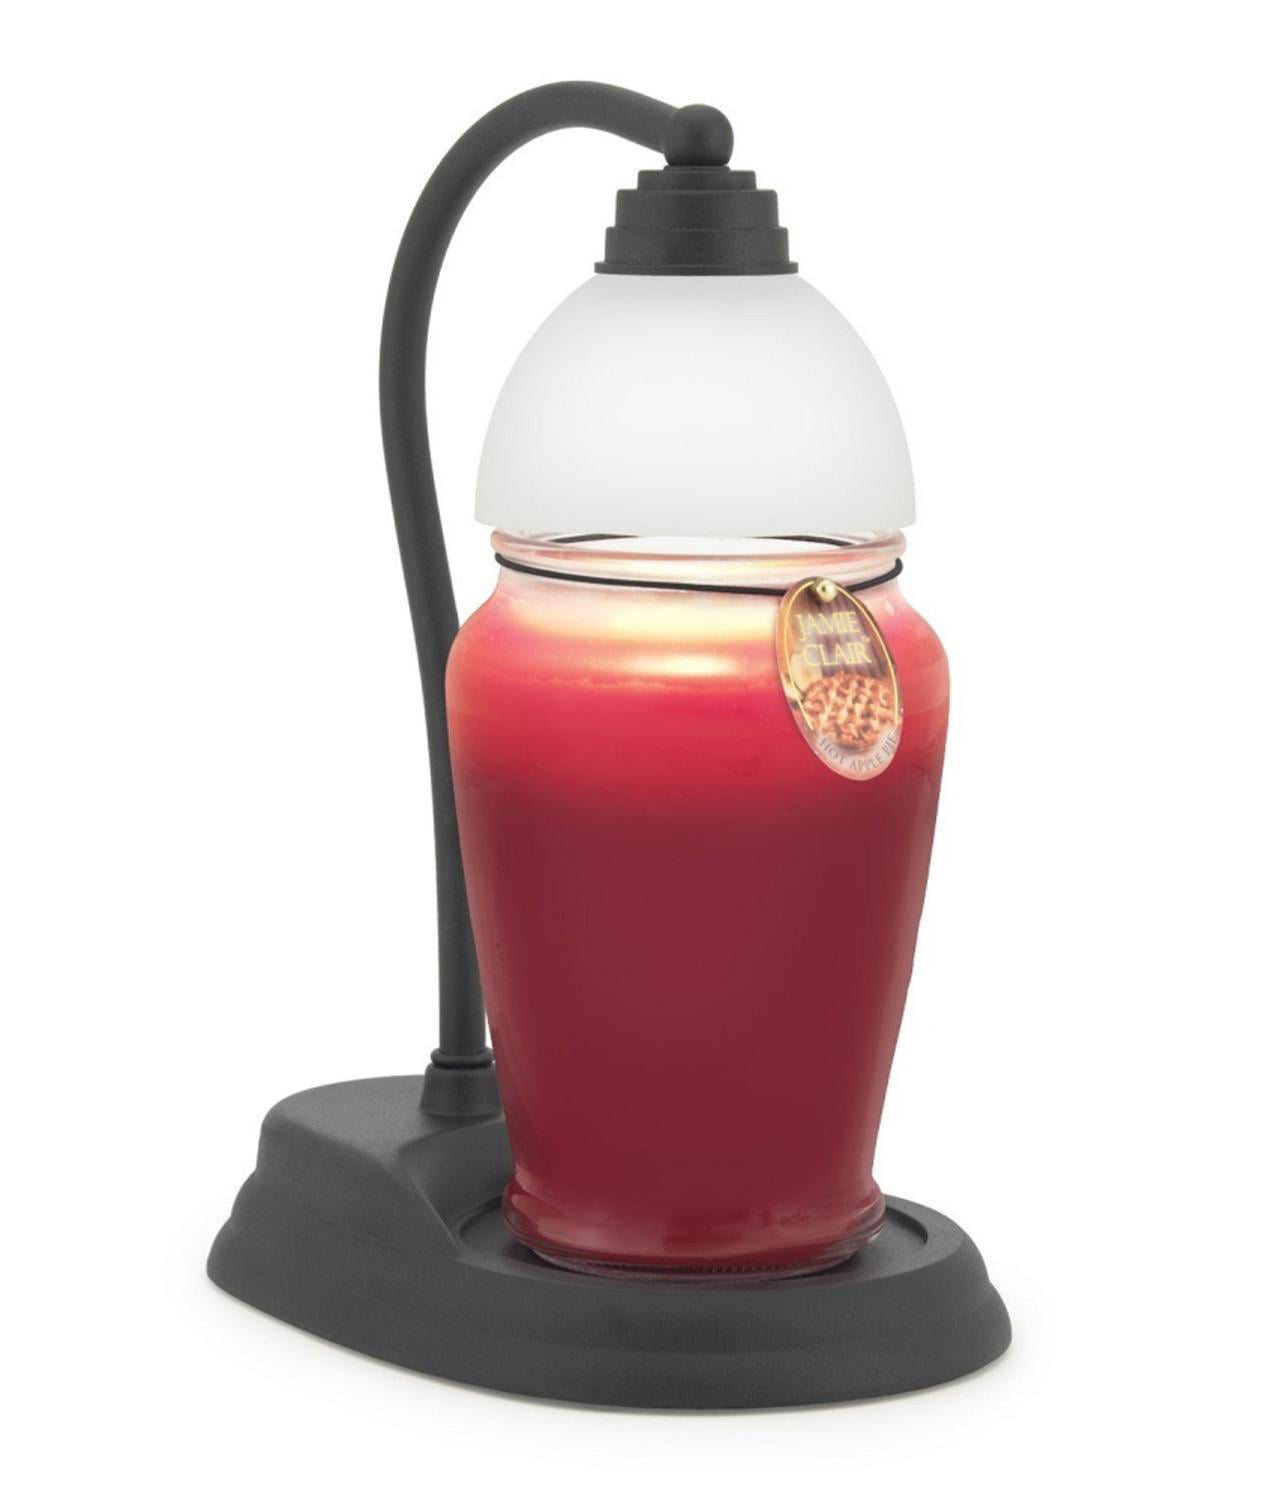 Pluto Electric Candle Warmer Marvel 220V Halogen Stand for Yanki Candle L M